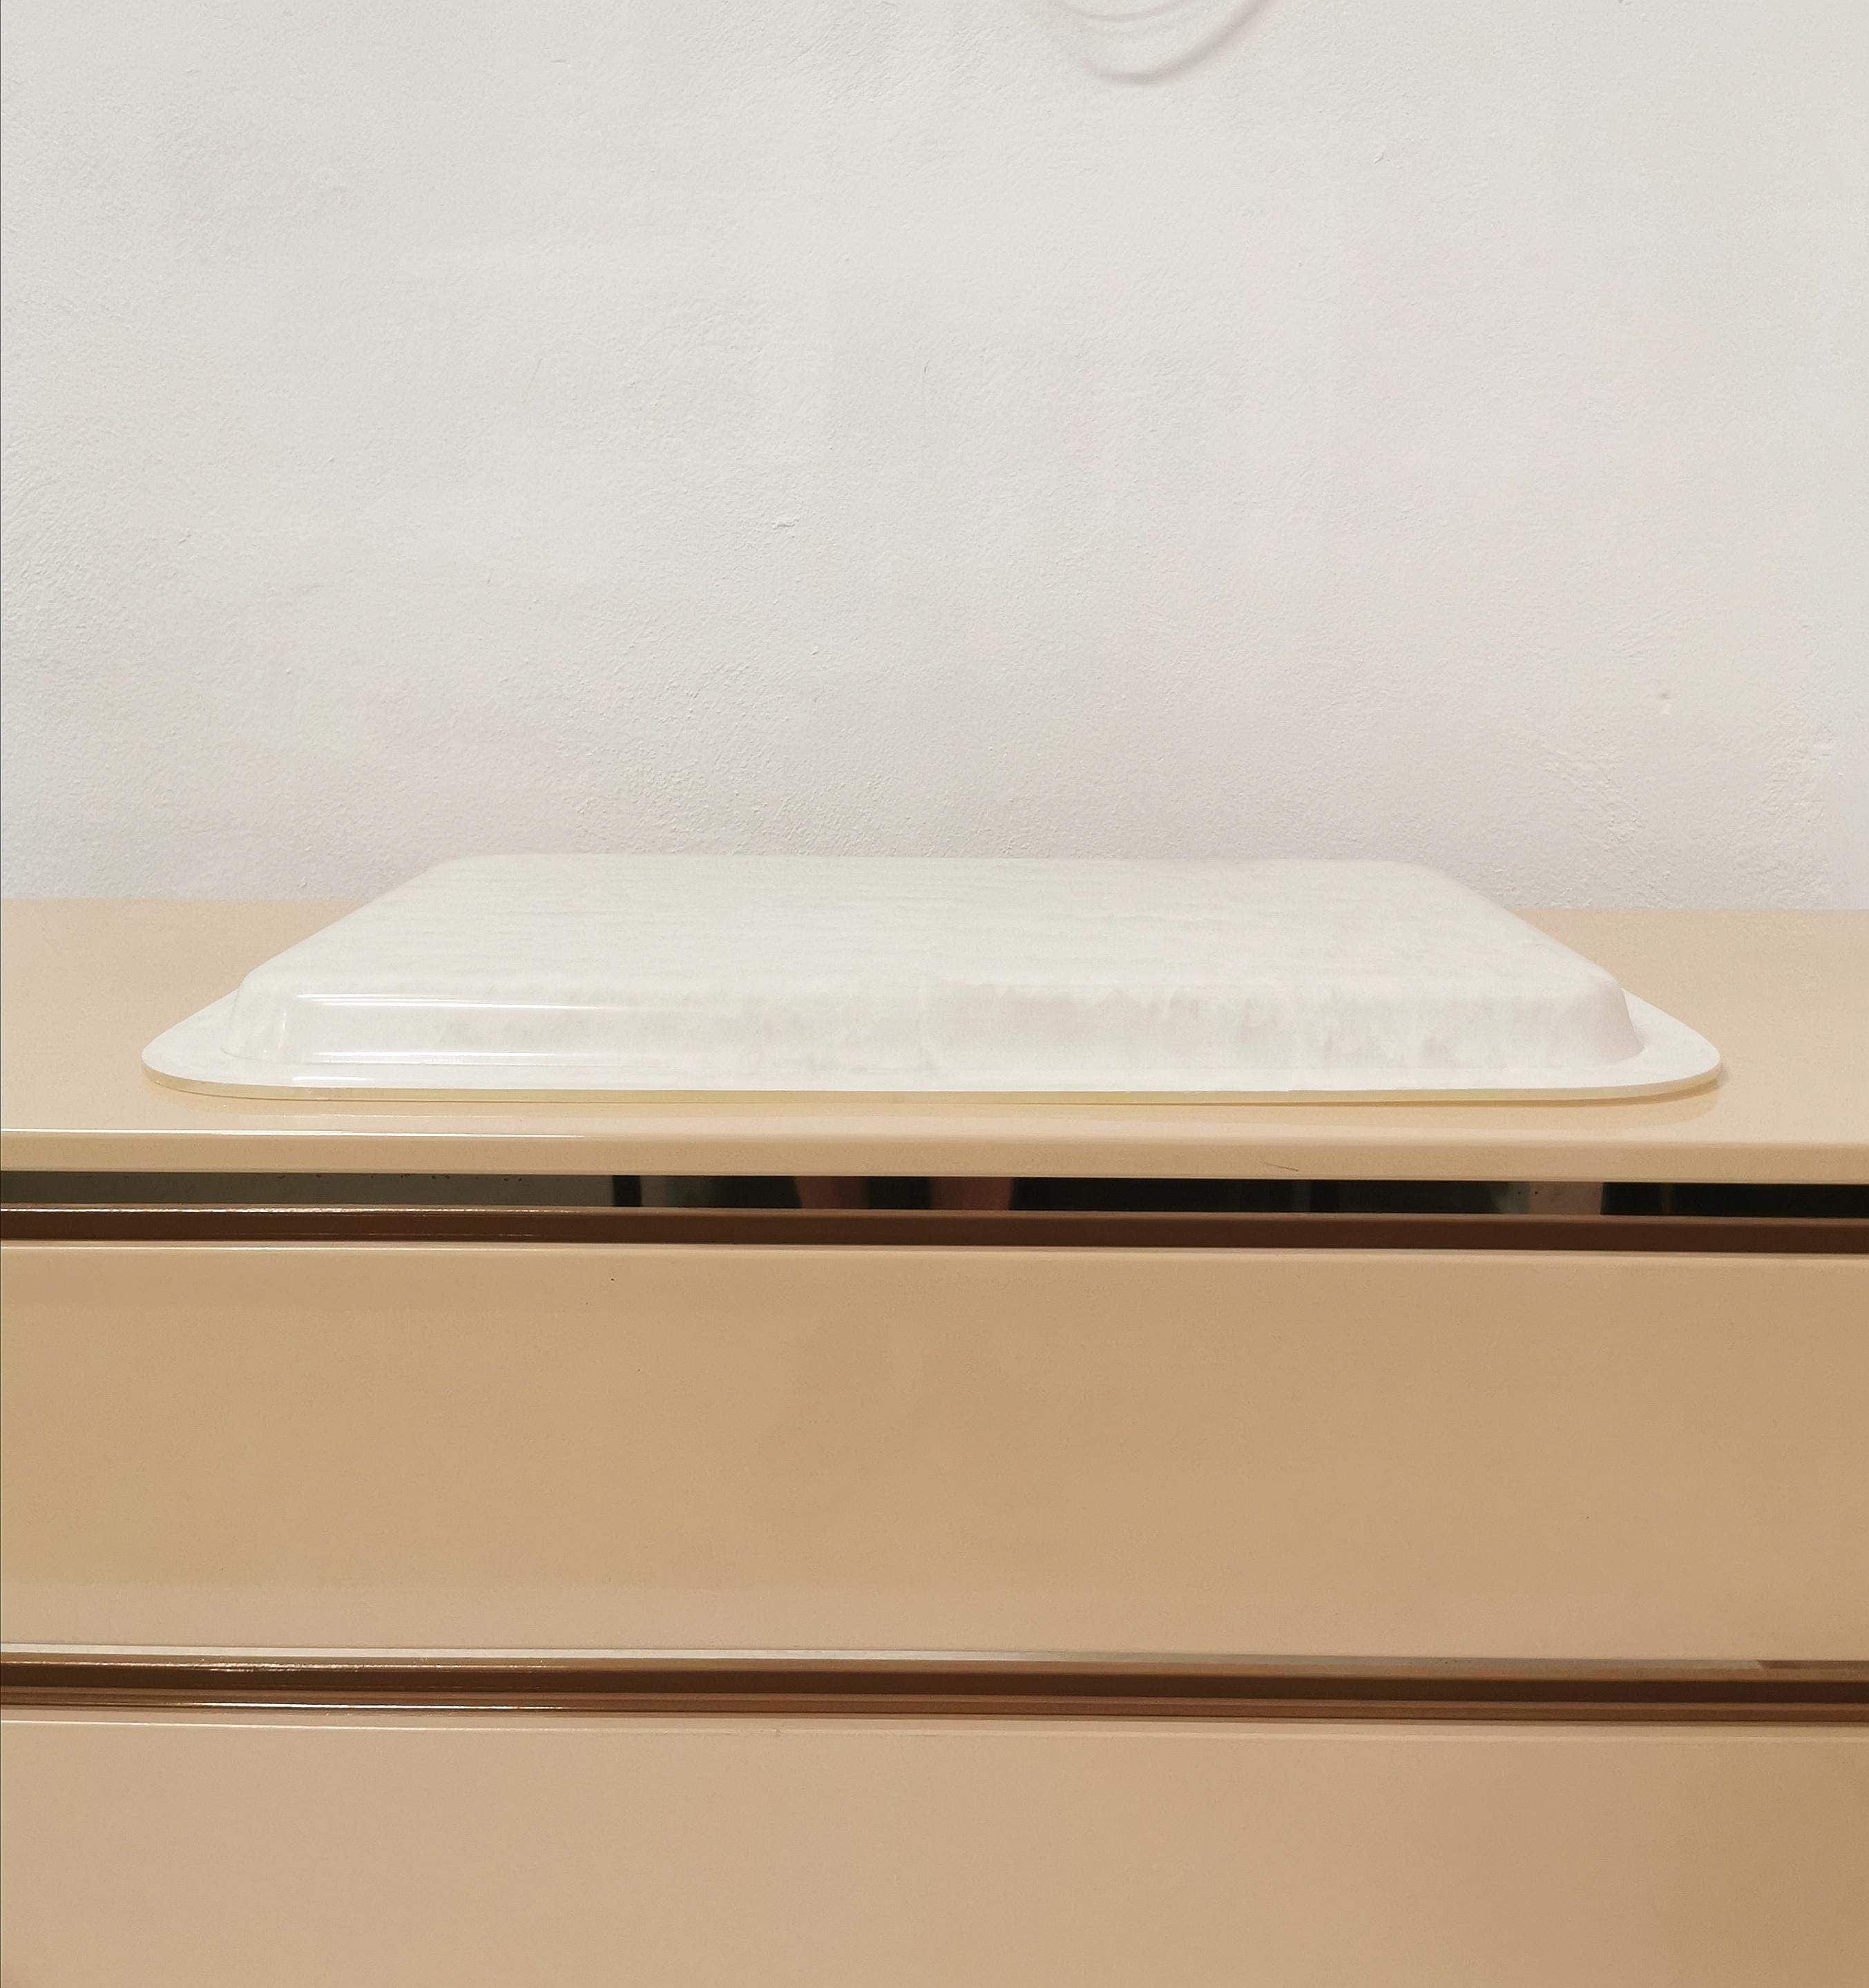 Midcentury Modern Tray Table Serving Piece Rectangular White Lucite Italy 1970s For Sale 3